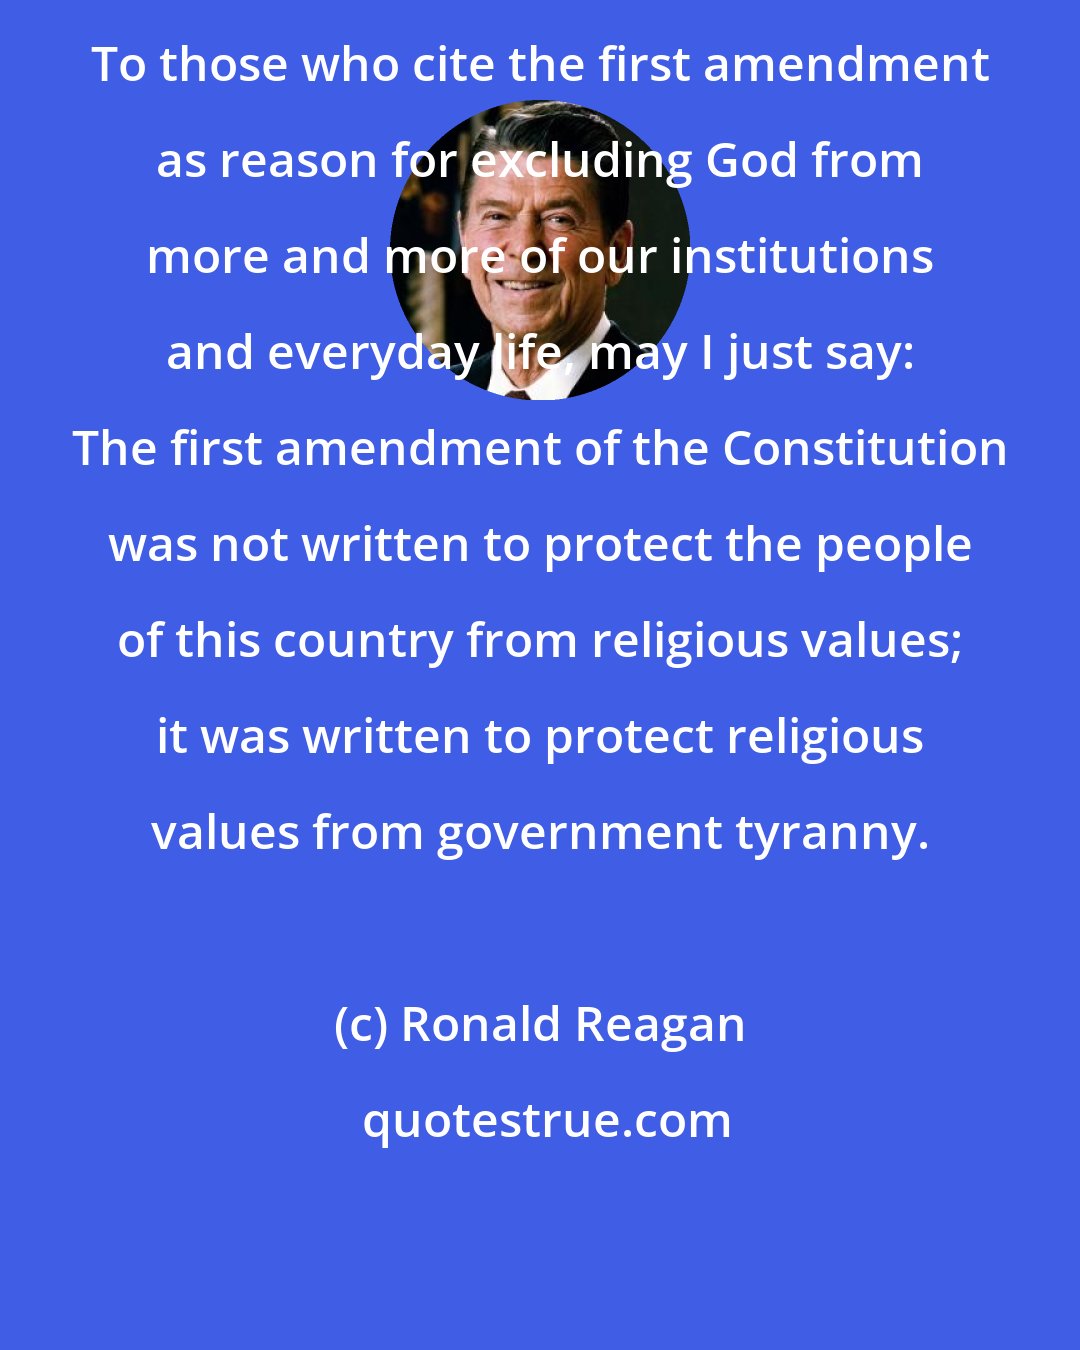 Ronald Reagan: To those who cite the first amendment as reason for excluding God from more and more of our institutions and everyday life, may I just say: The first amendment of the Constitution was not written to protect the people of this country from religious values; it was written to protect religious values from government tyranny.